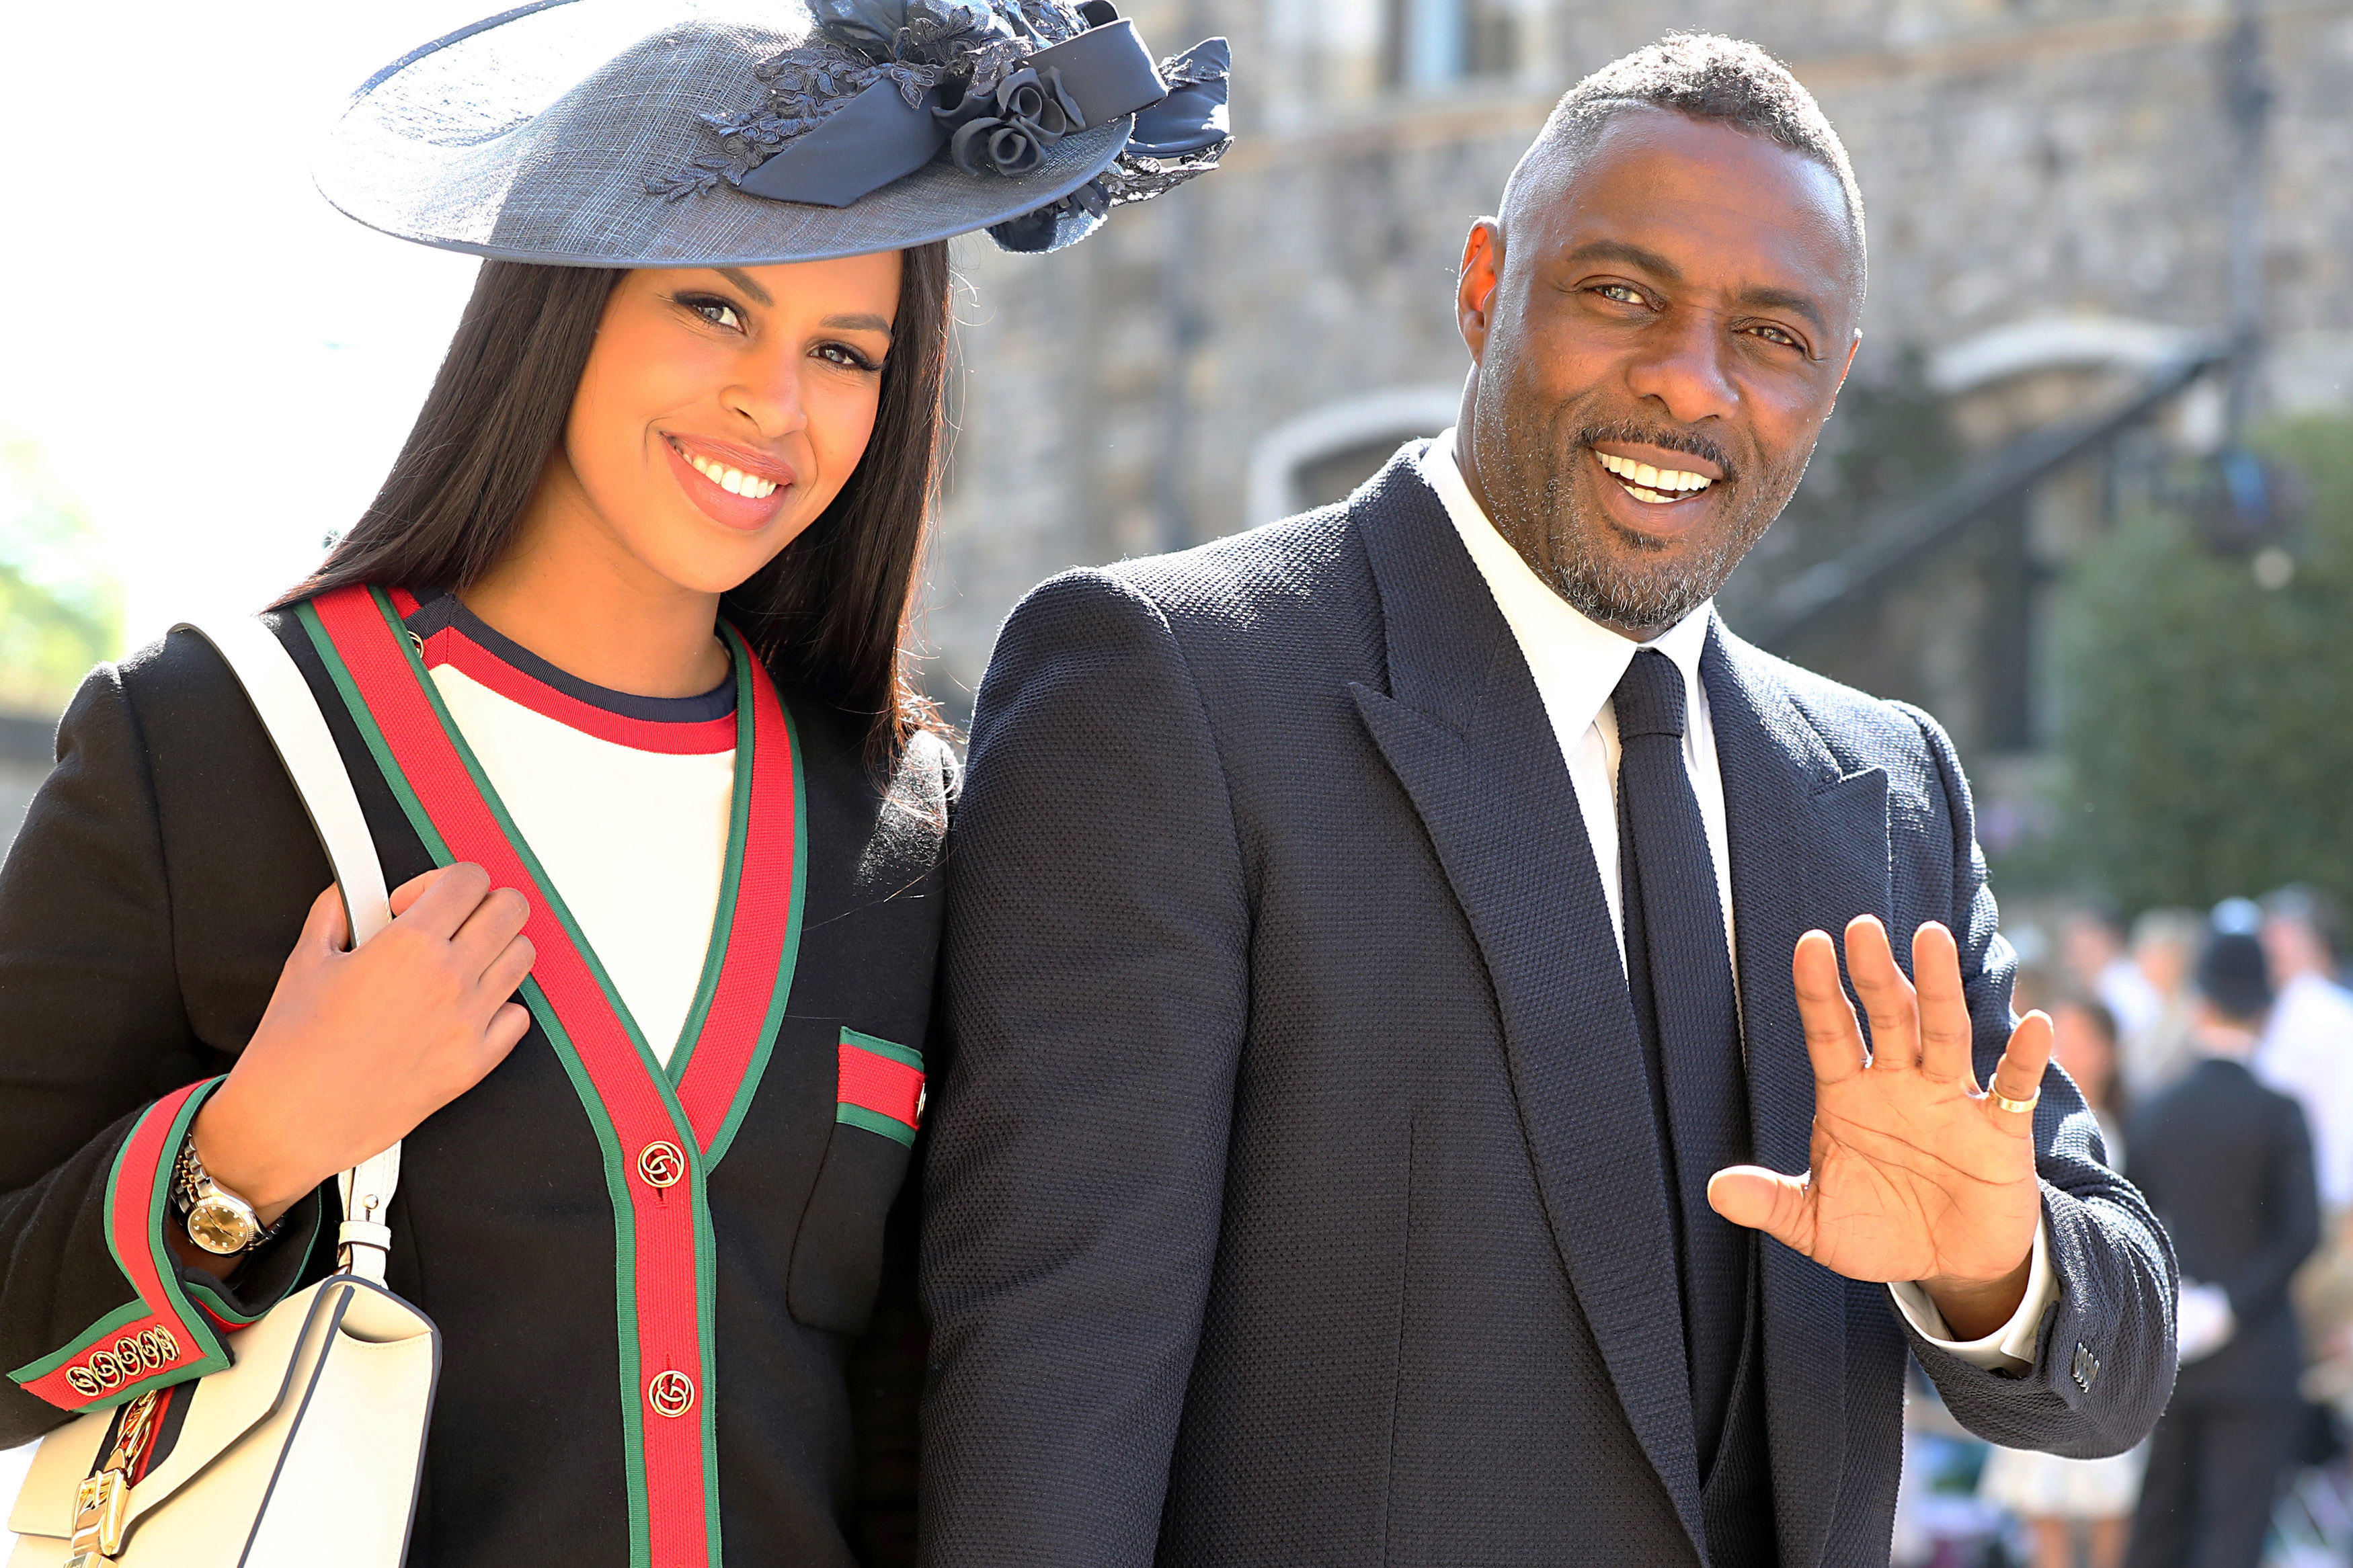 Close-up of Idris in a suit and tie waving with his now-wife, Sabrina Dhowre Elba